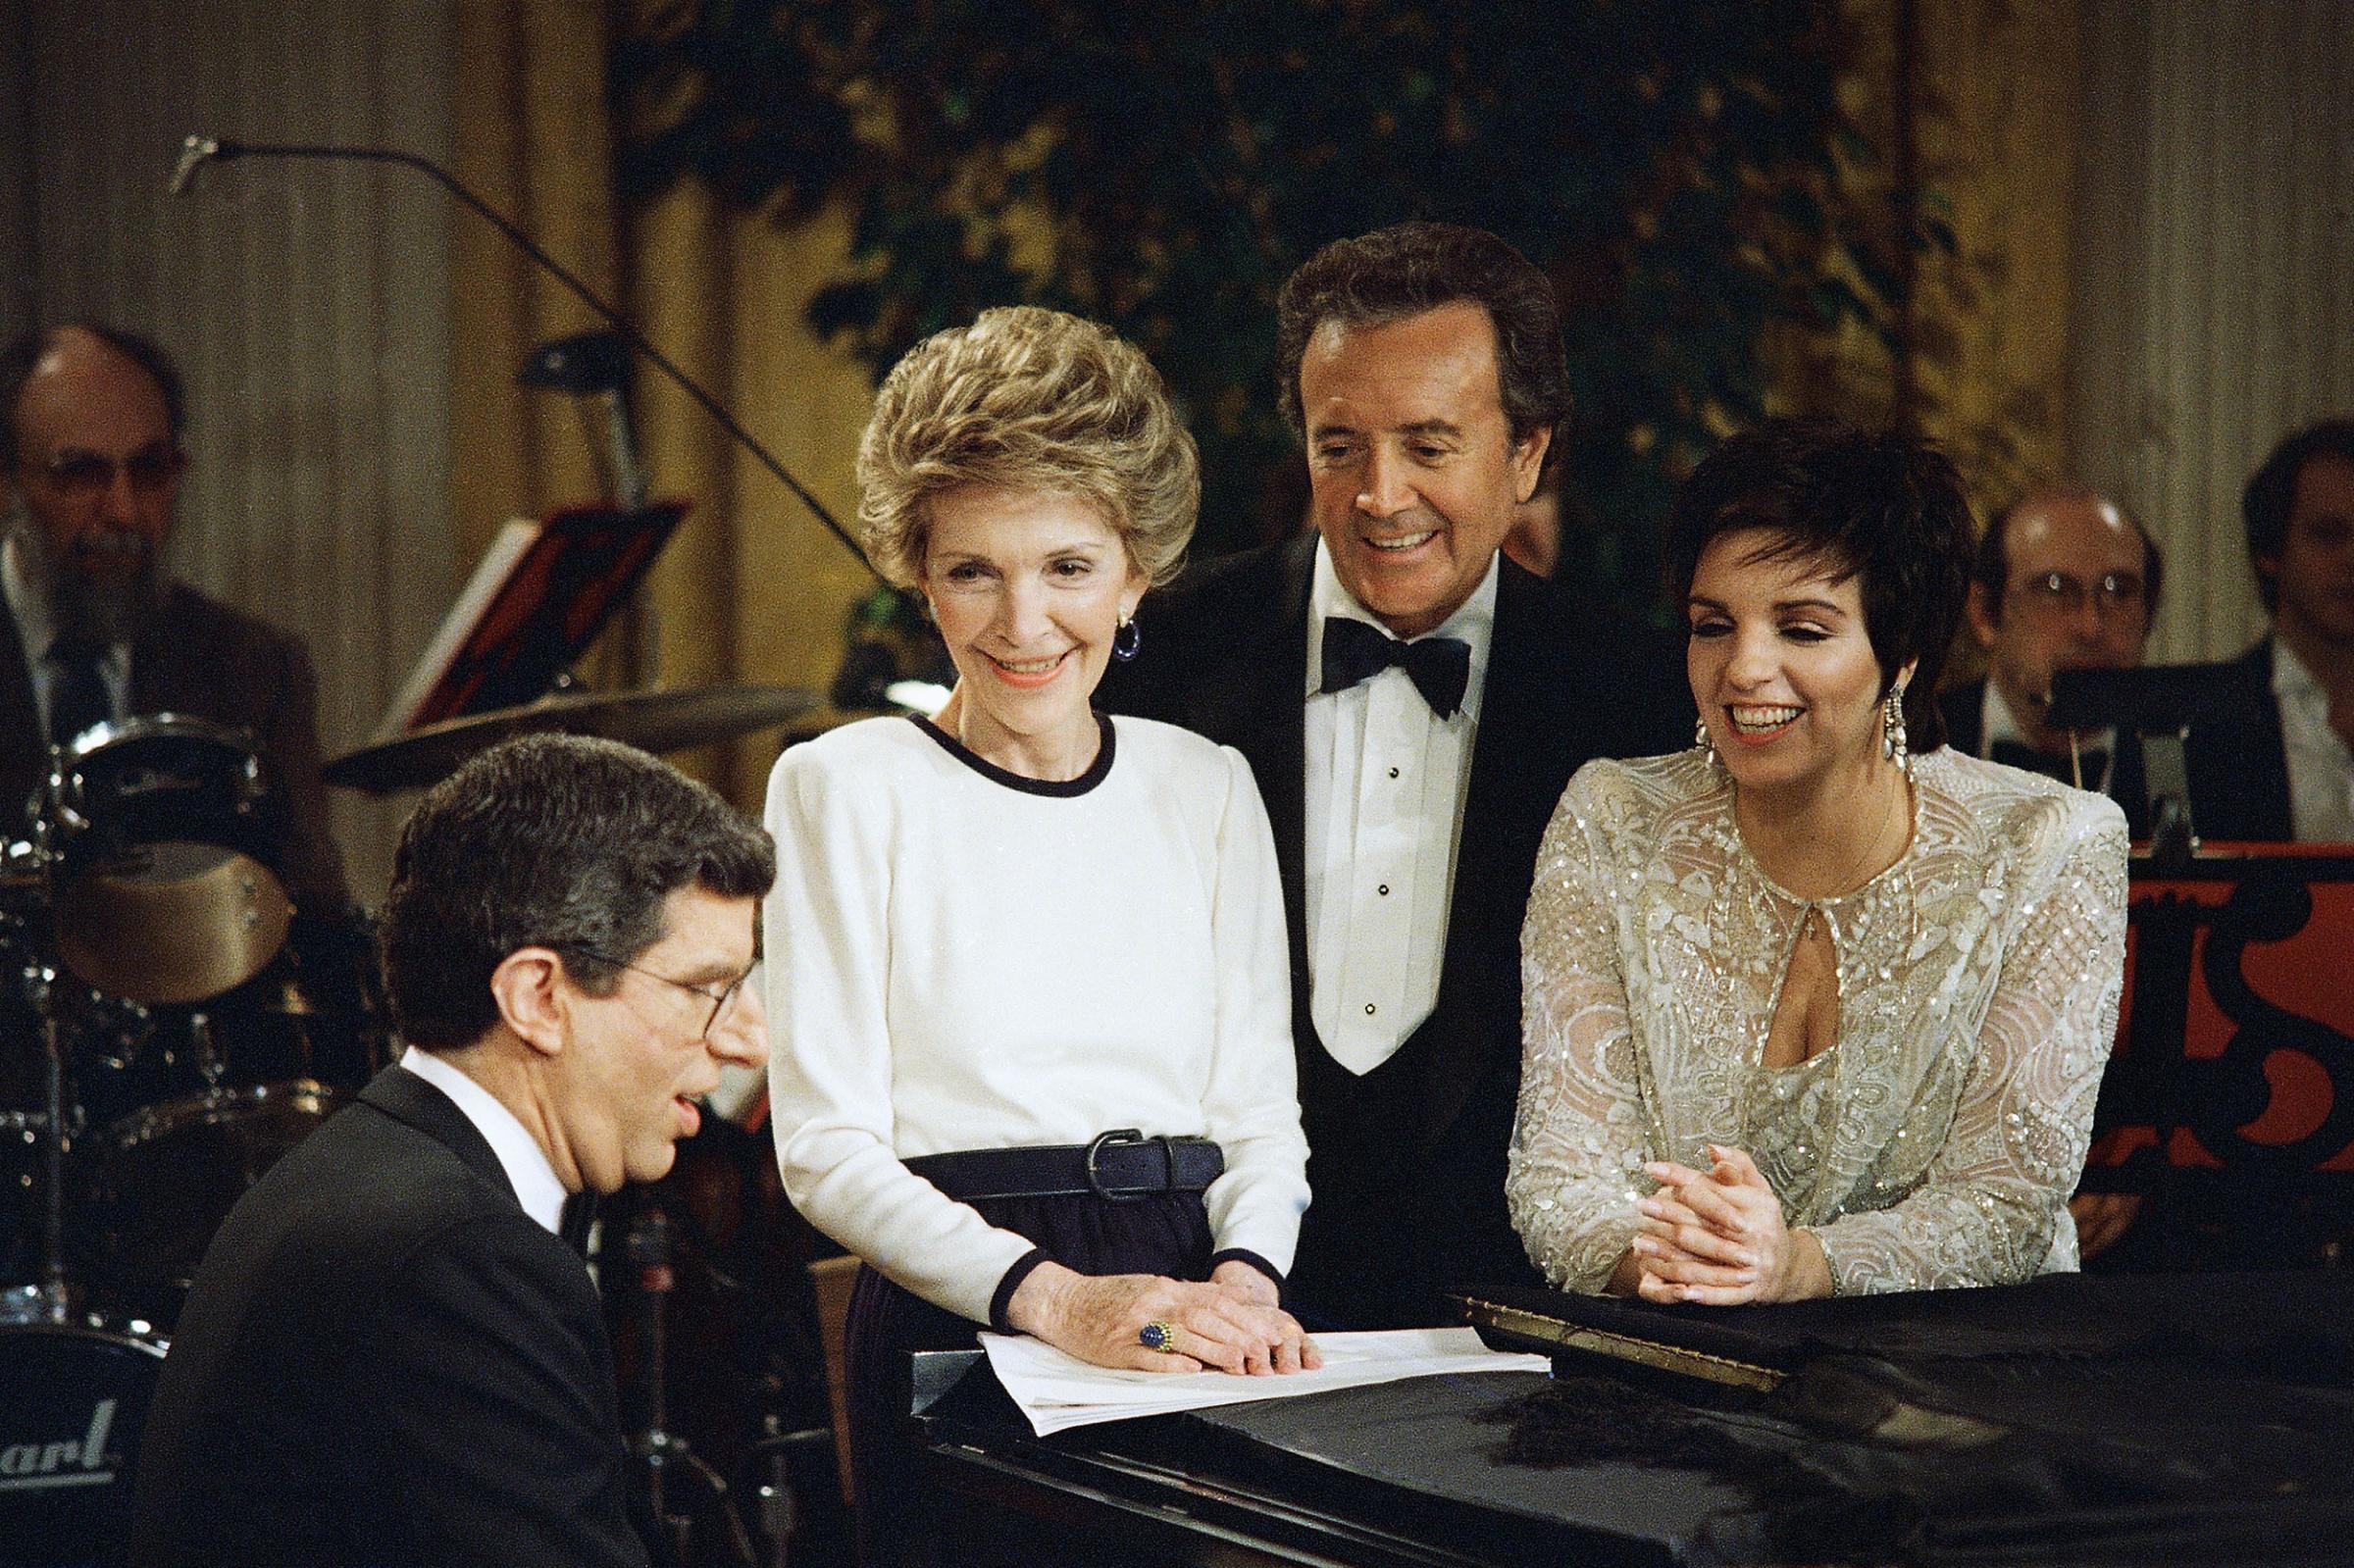 Nancy Reagan sings a song along with Marvin Hamlisch, Vic Damone and Liza Minnelli during a rehearsal at the White House in Washington on March 8, 1987.